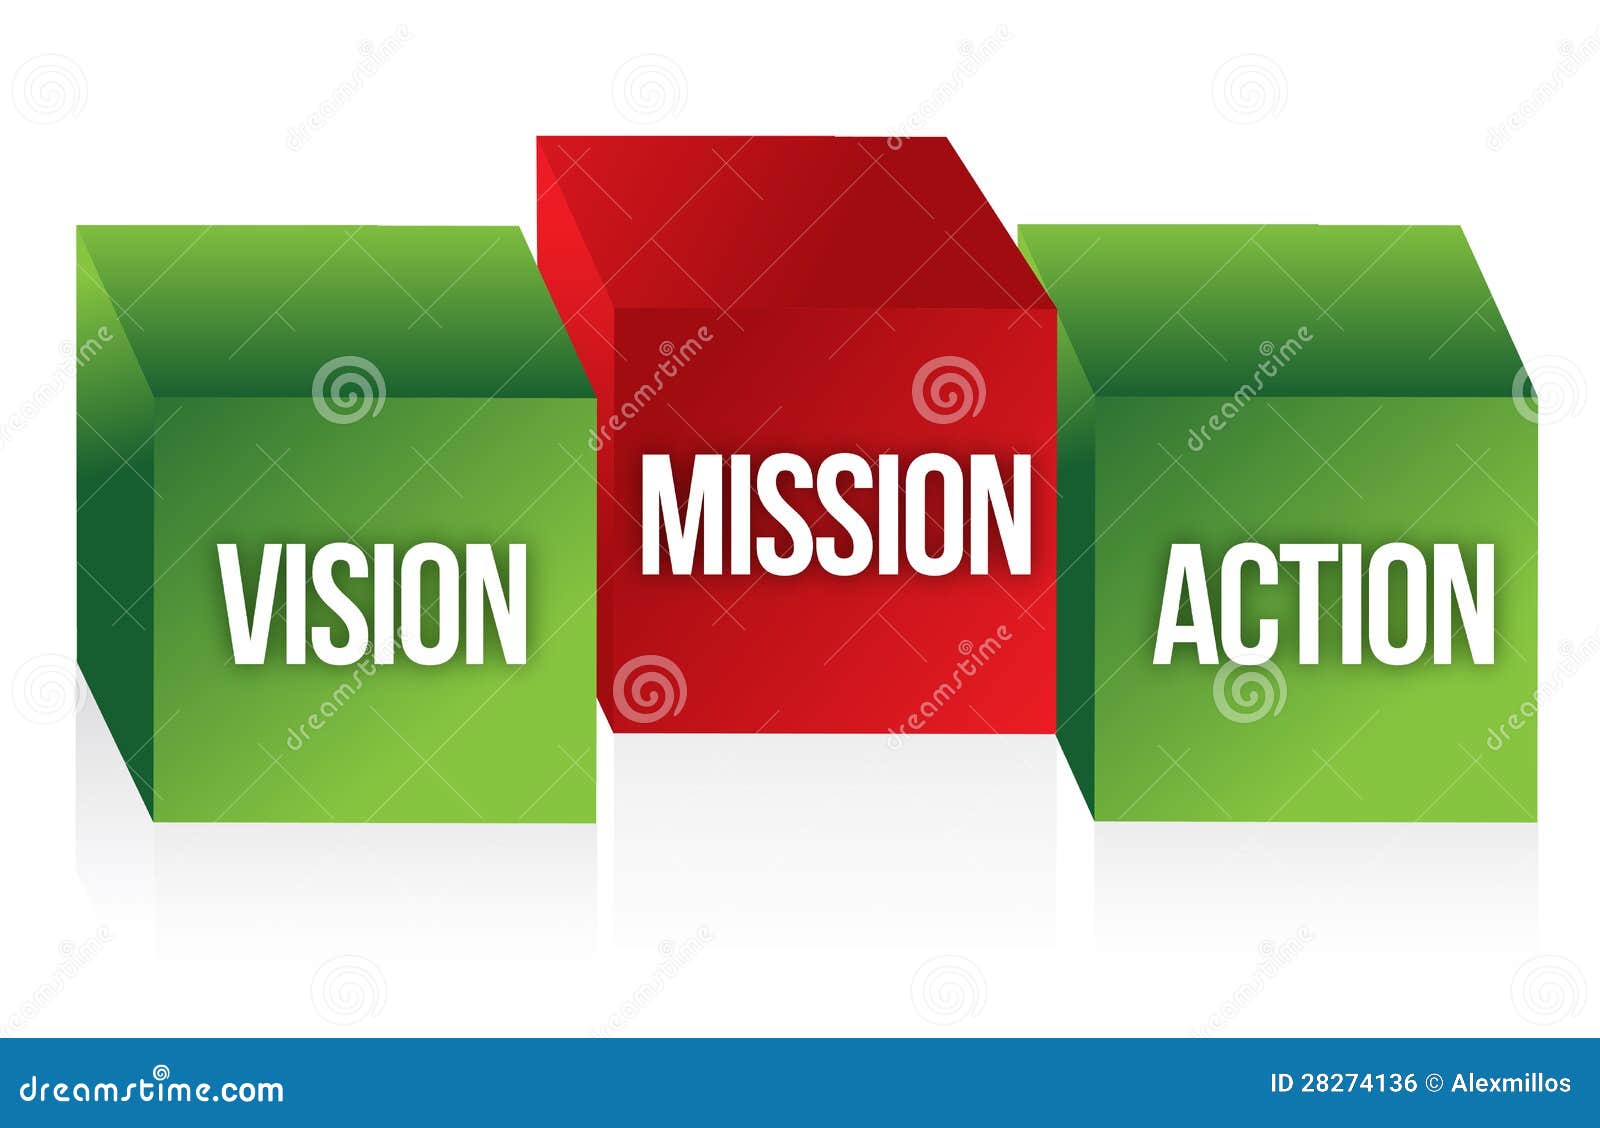 Vision, Mission and Action stock illustration. Illustration of mission